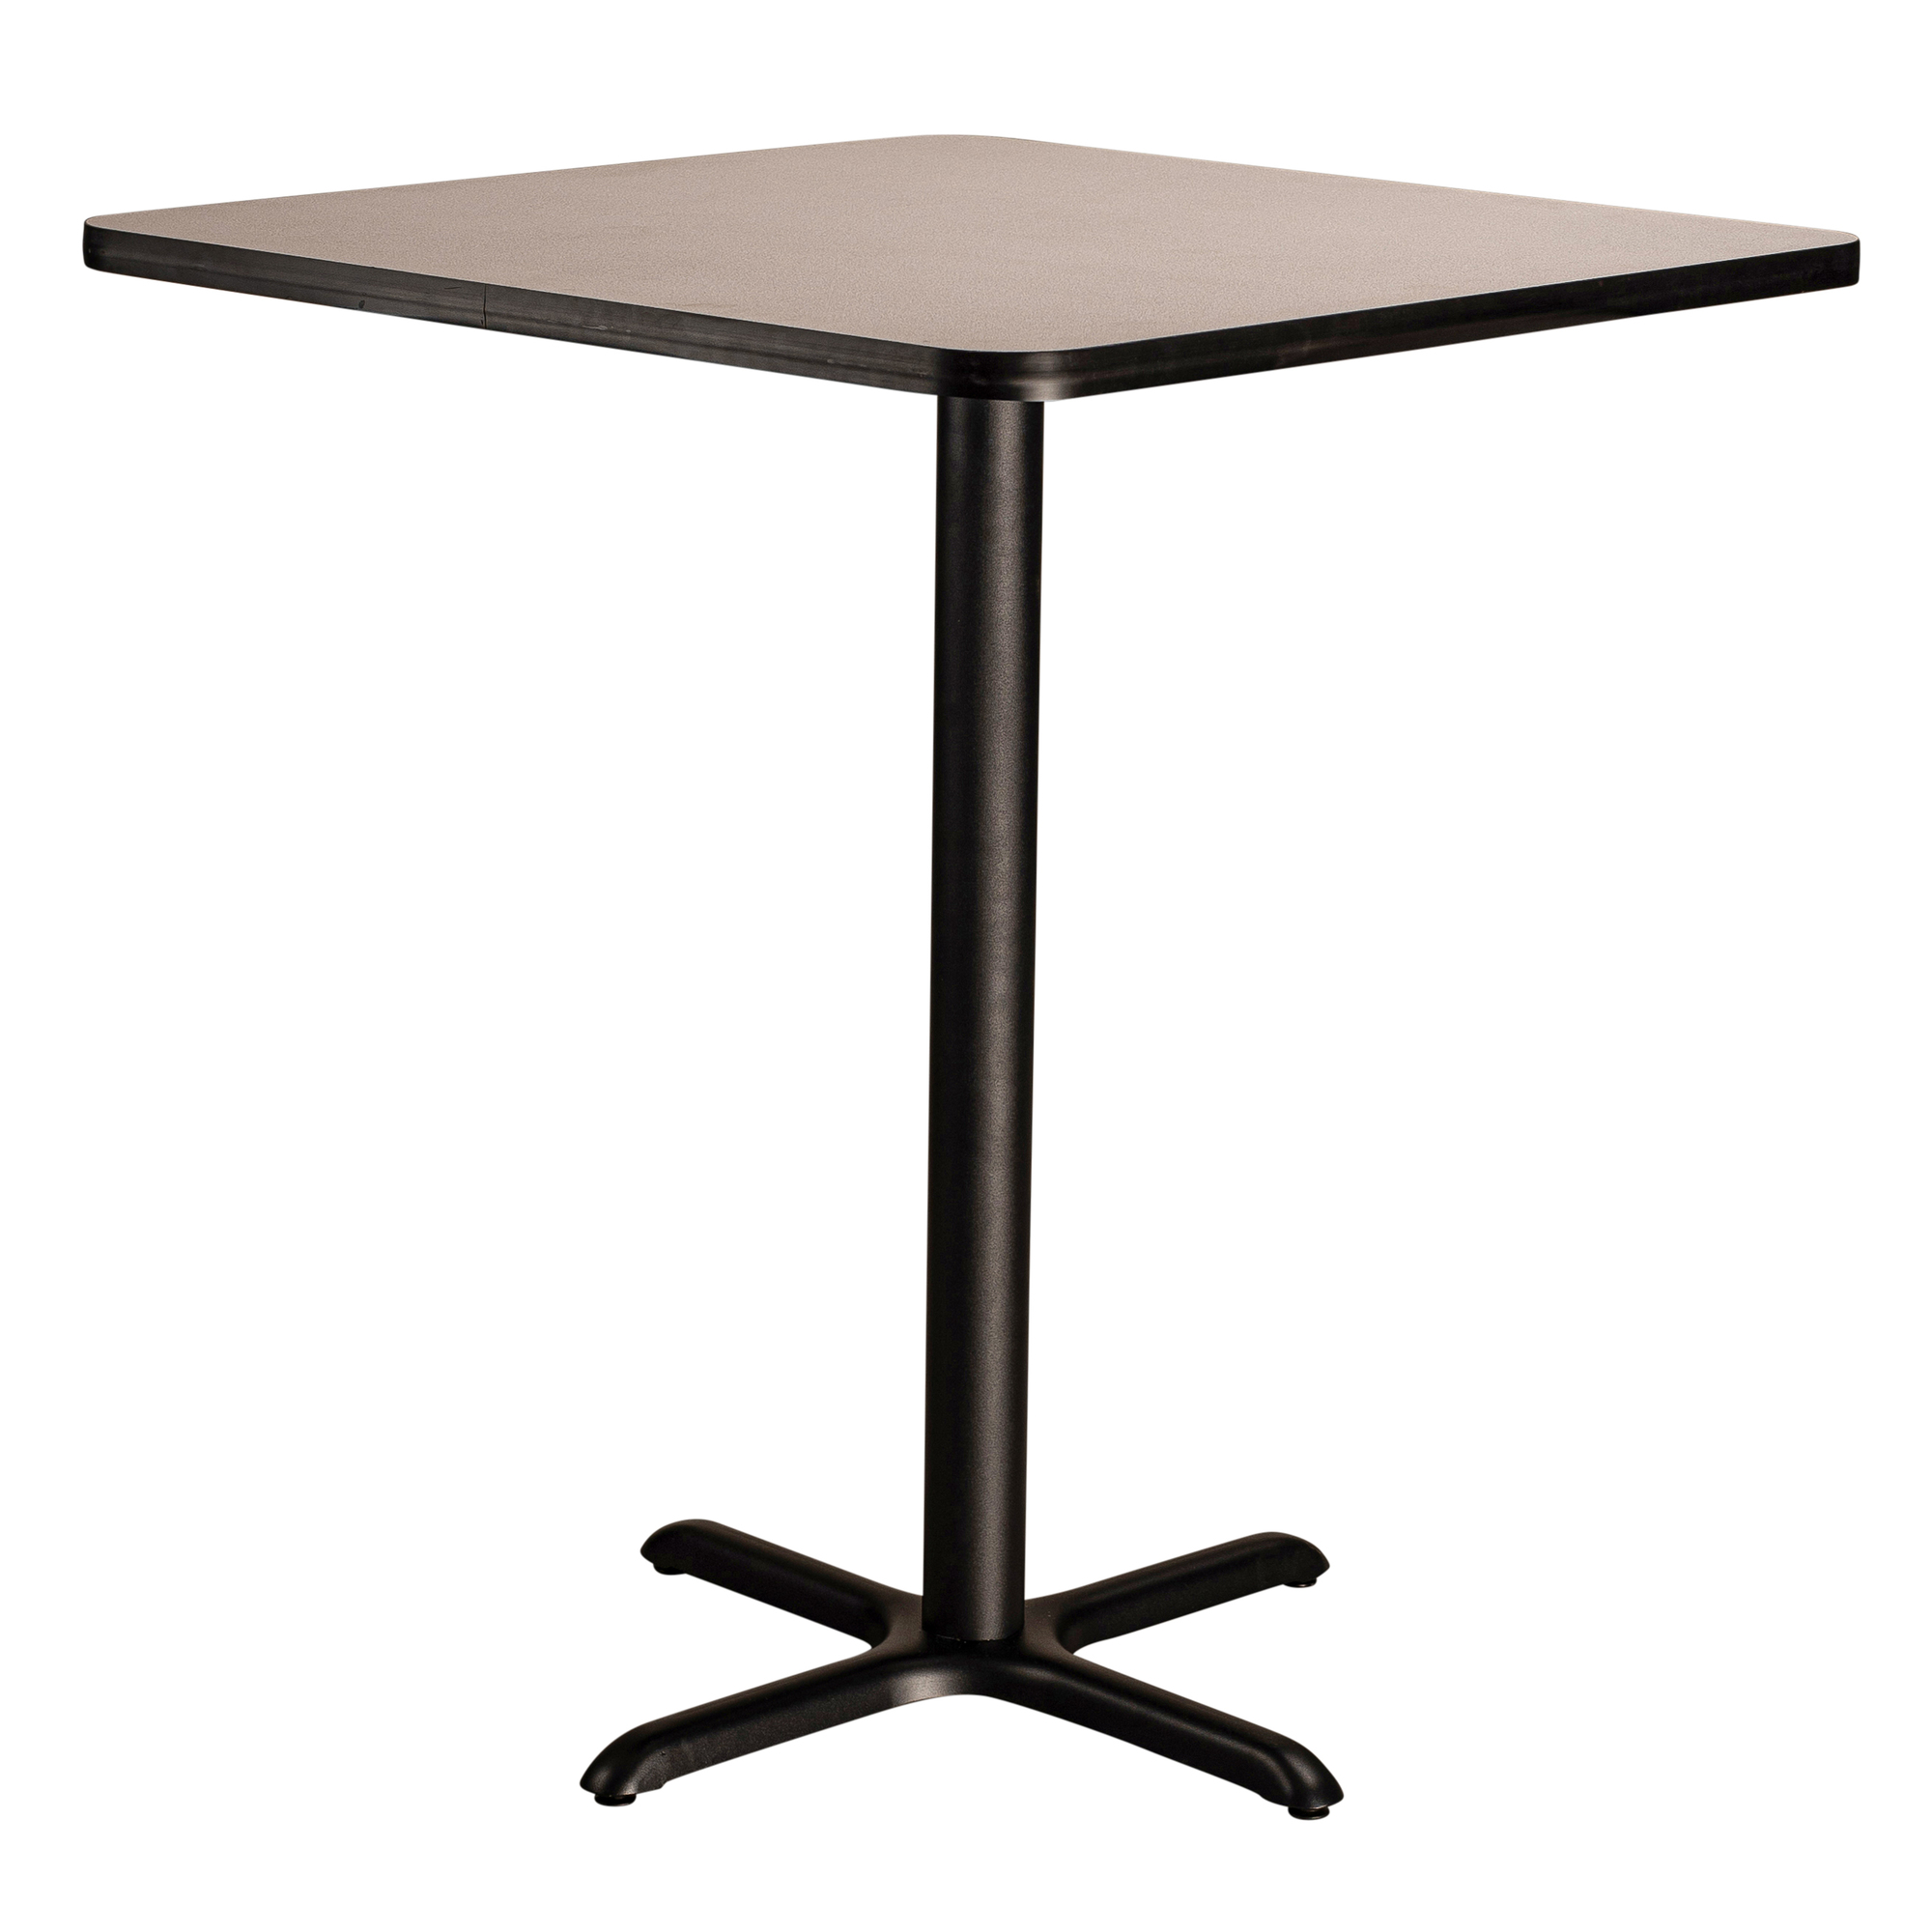 Cafe Table, 36x36x30 Square """"X"""" Base, Height 30 in, Model - National Public Seating CT33636XDPBTMGY